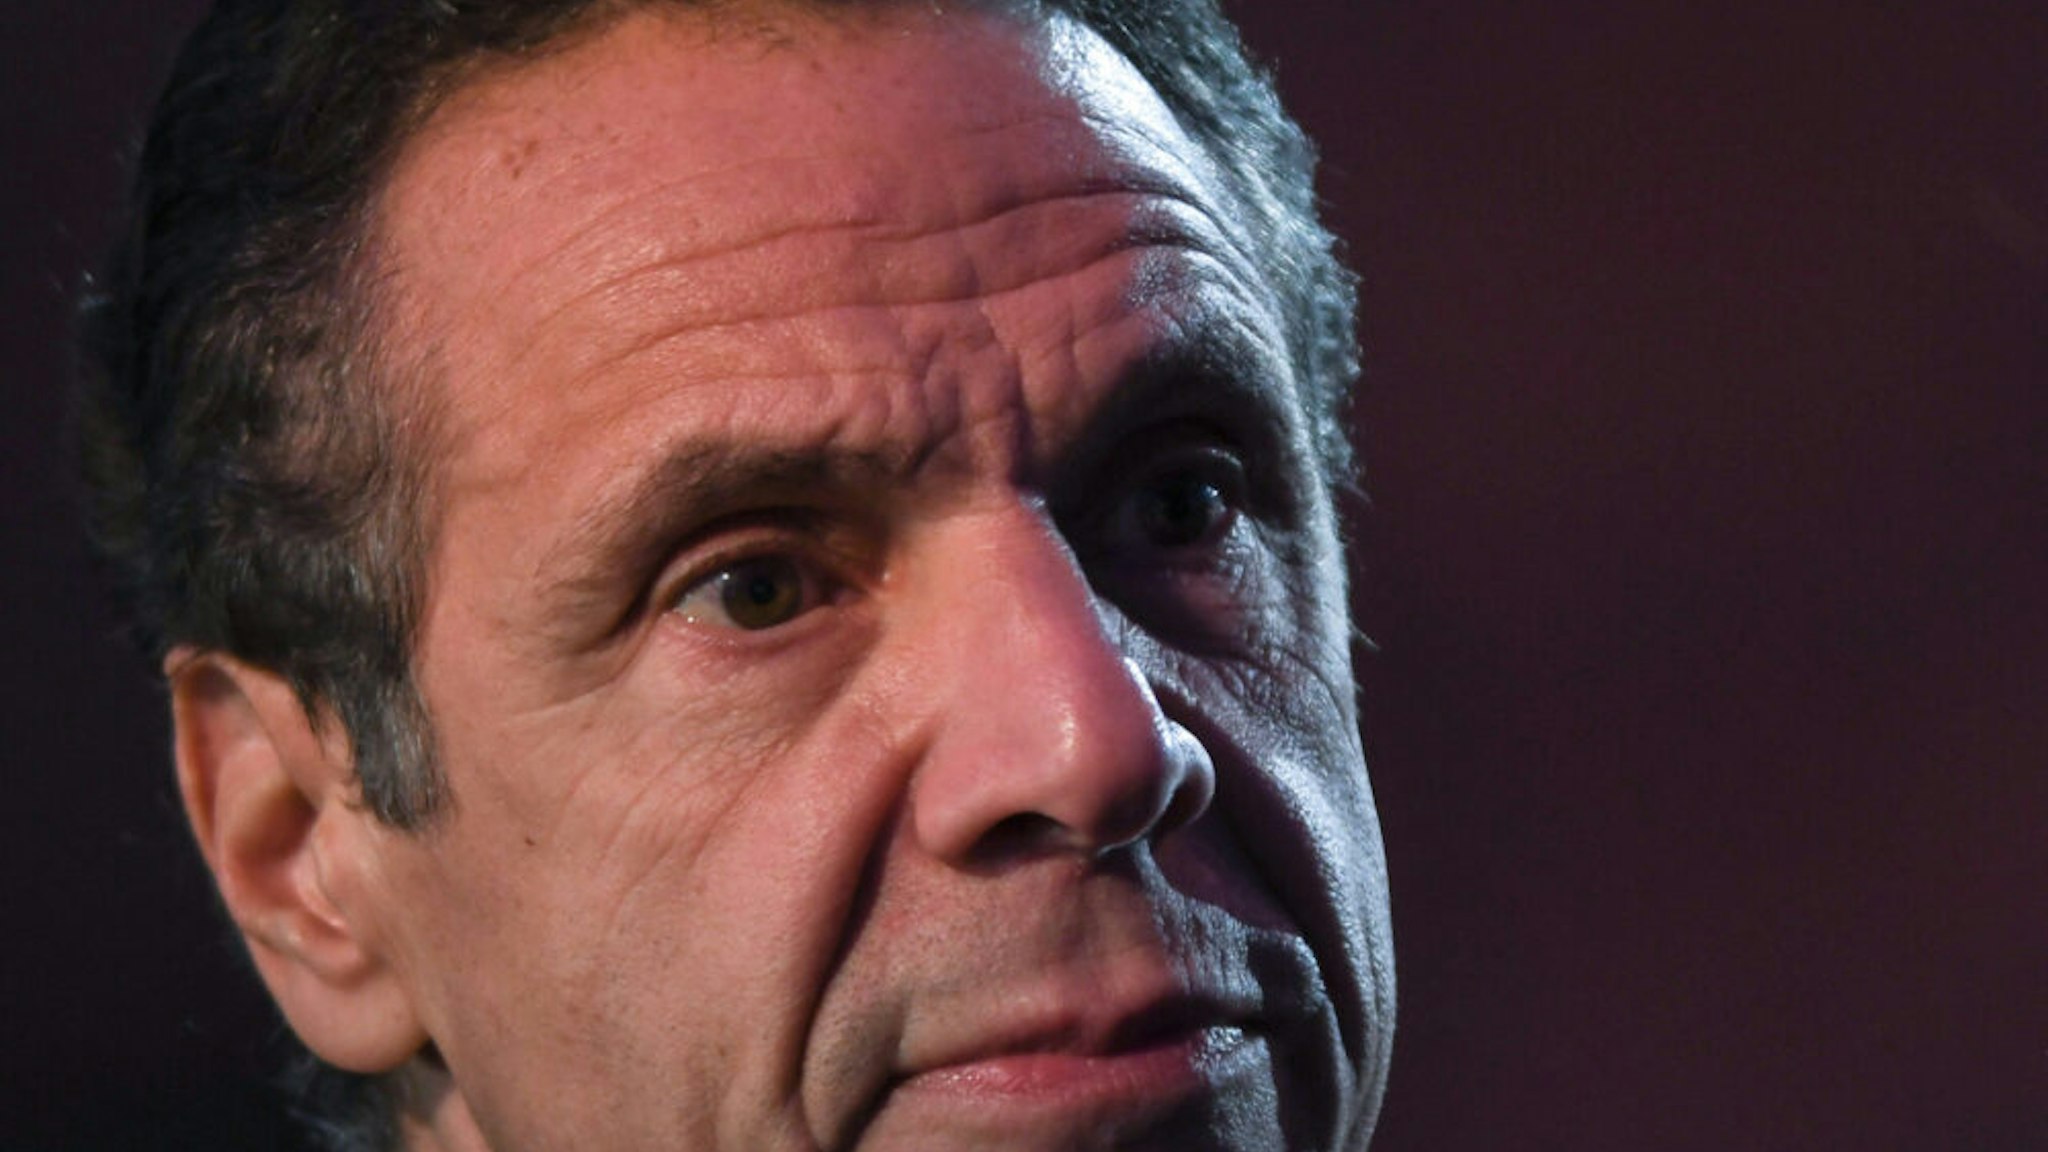 A file picture of Andrew Cuomo, Governor of New York, taken on January 27 in Poland.Chris Cuomo, a CNN anchor and the youngest brother of NY Governor Andrew Cuomo, has tested positive for coronavirus. On Tuesday, March 31, 2020, in Krakow, Poland.